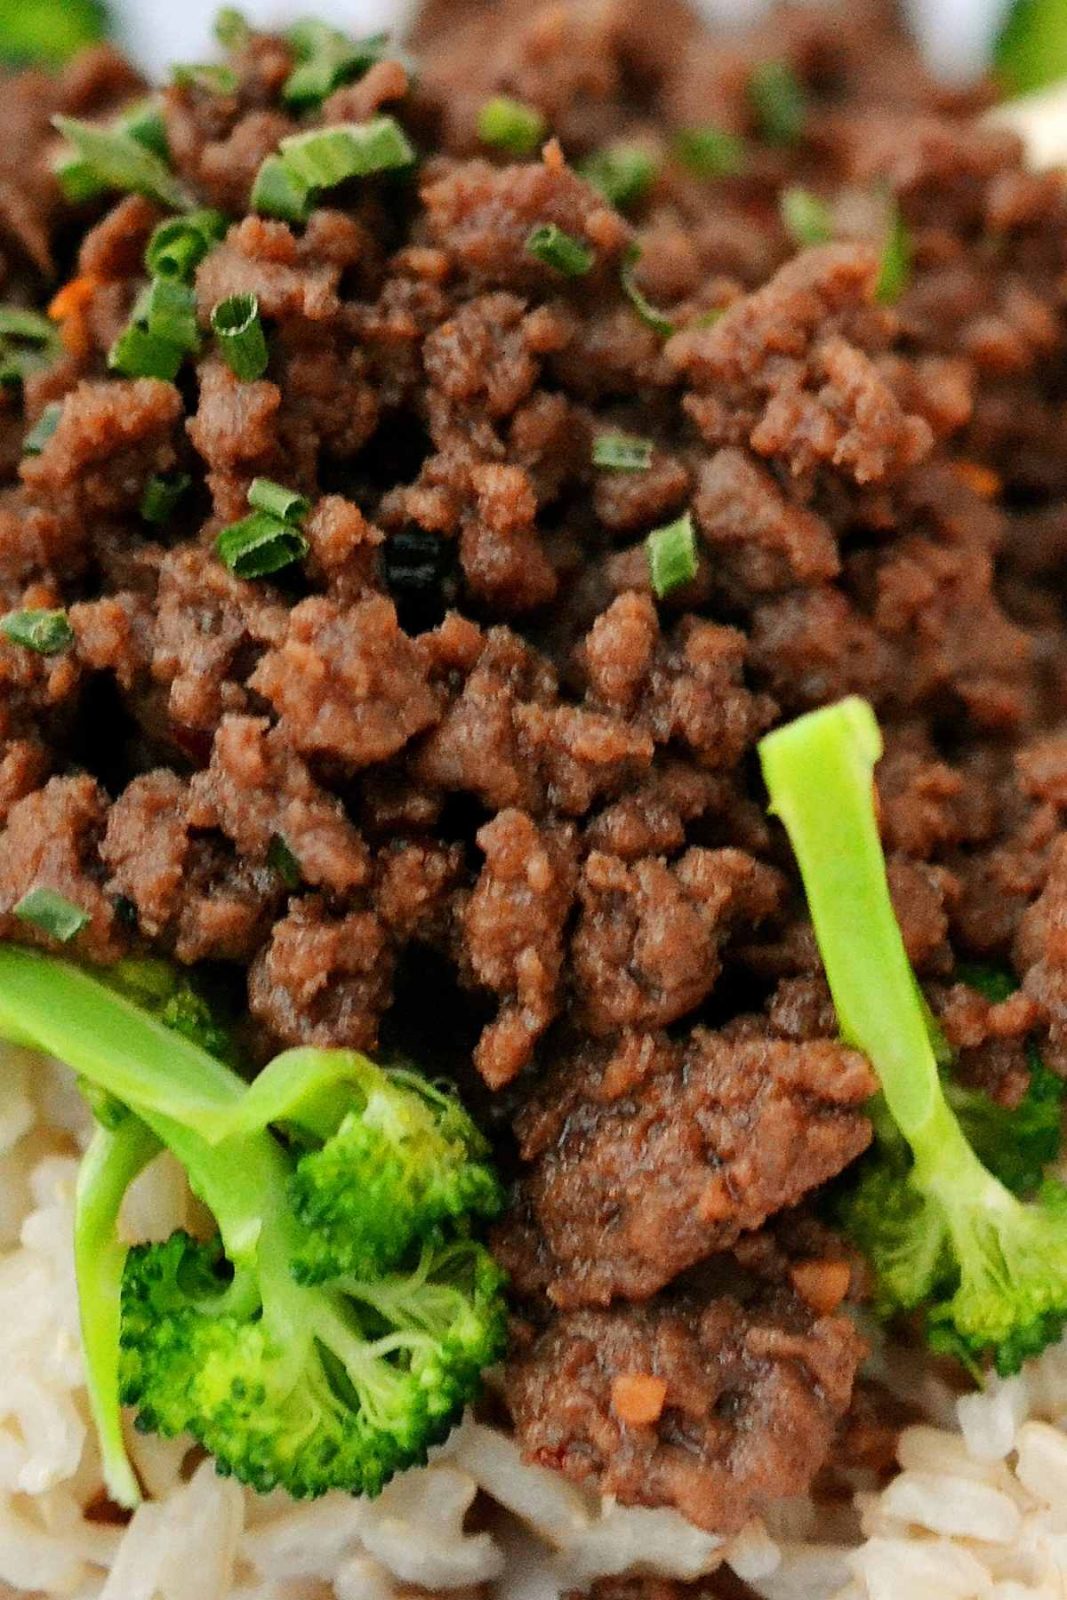 Ground beef is a super versatile and inexpensive meat that can be used to create delicious meals the entire family will love. It’s also a convenient ingredient to keep in your freezer for an easy dinner. But the question is: can you cook frozen ground beef without thawing it? In this post, we’ll share with you everything you need to know about cooking with frozen ground beef.